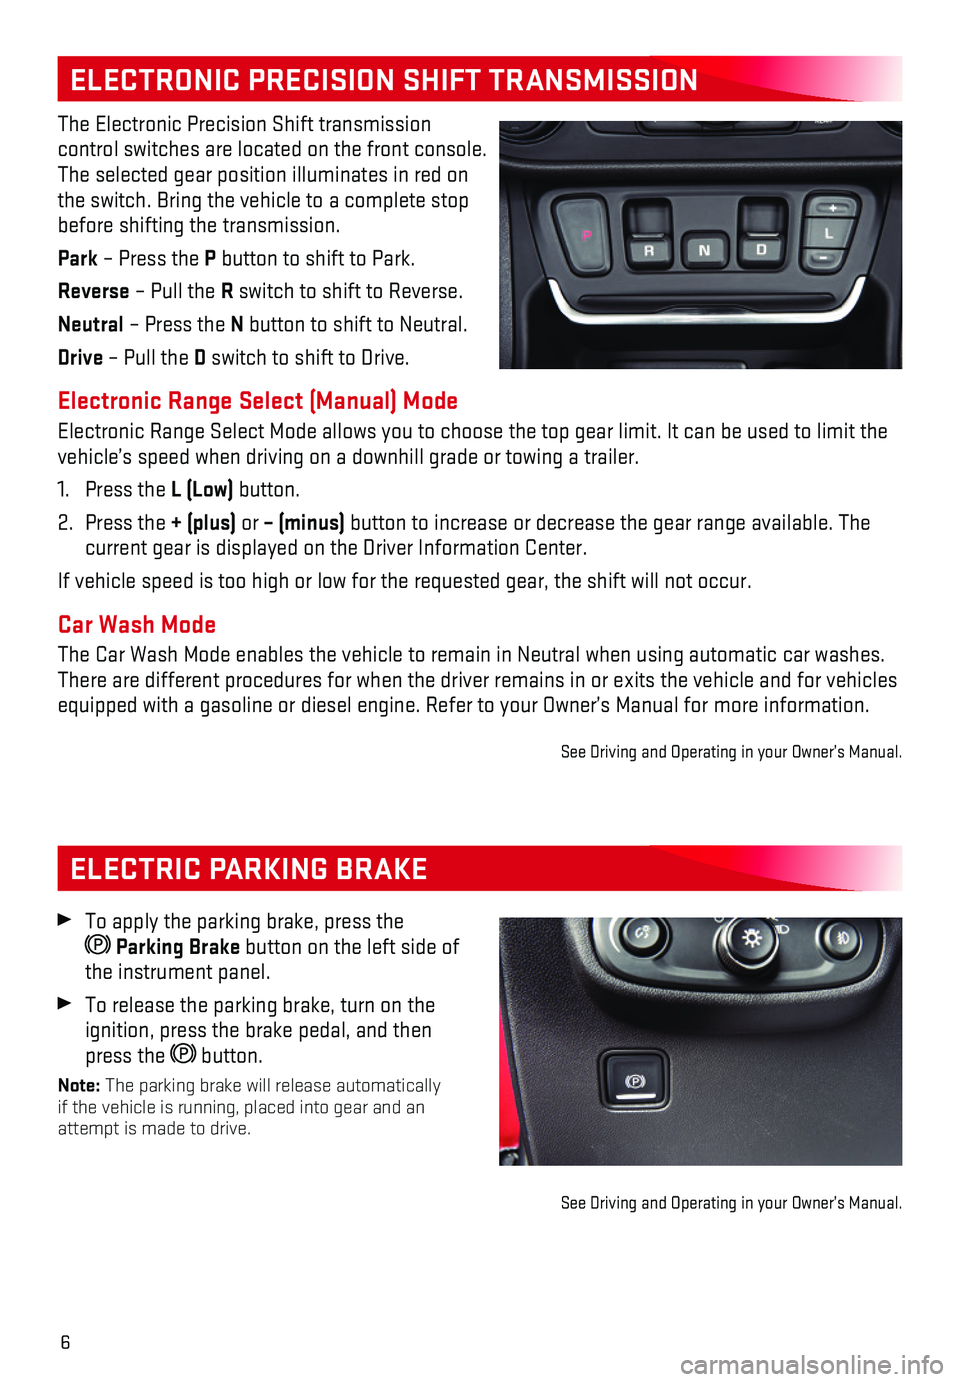 GMC TERRAIN 2018  Get To Know Guide 6
ELECTRIC PARKING BRAKE
ELECTRONIC PRECISION SHIFT TRANSMISSION 
The Electronic Precision Shift transmission  
control switches are located on the front console. The selected gear position illuminate